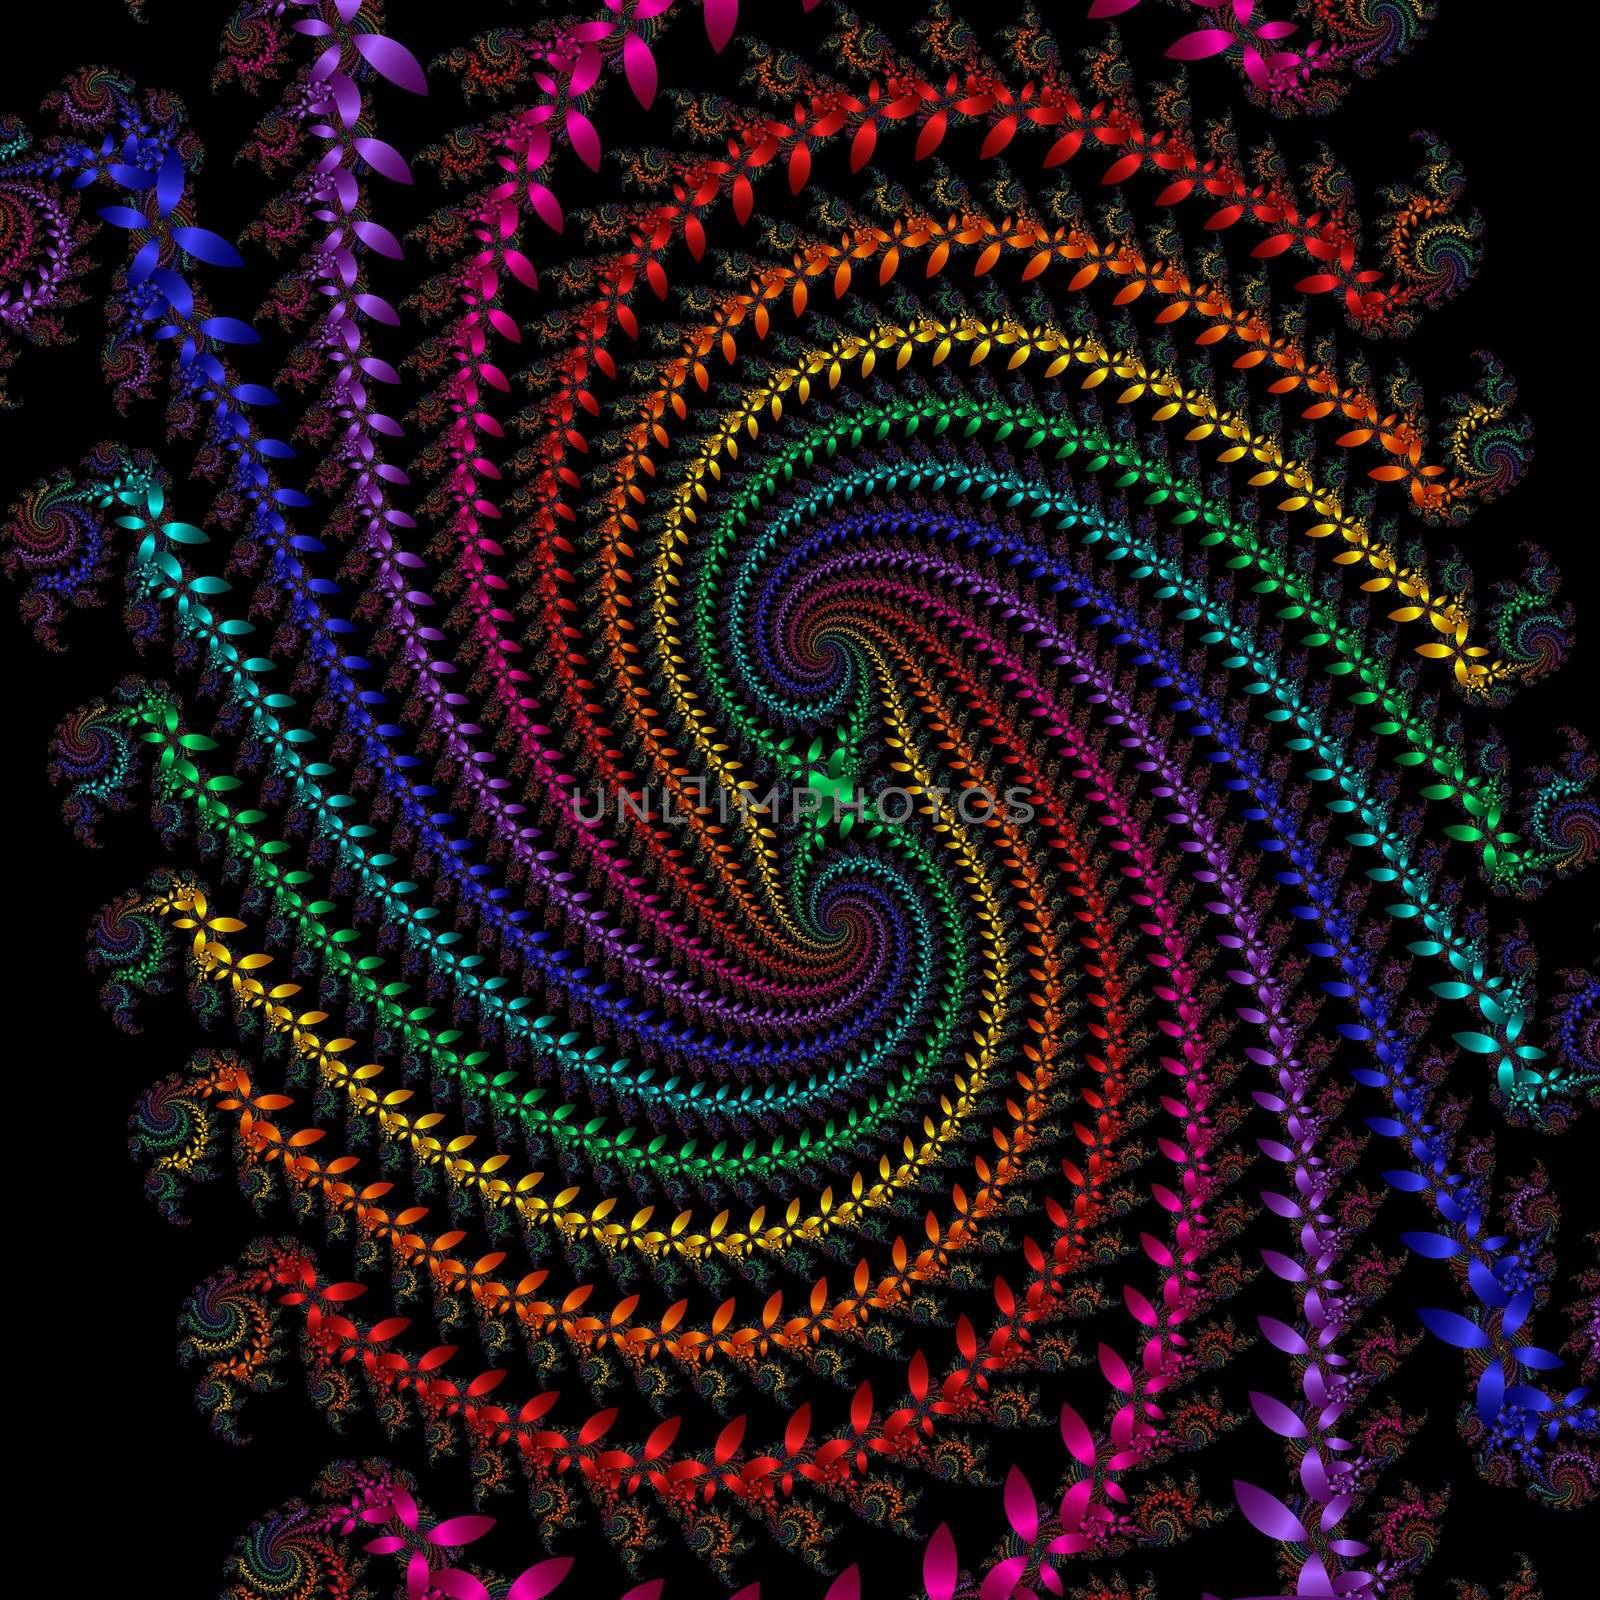 multi colored double spiral over black background formed bymany flowers